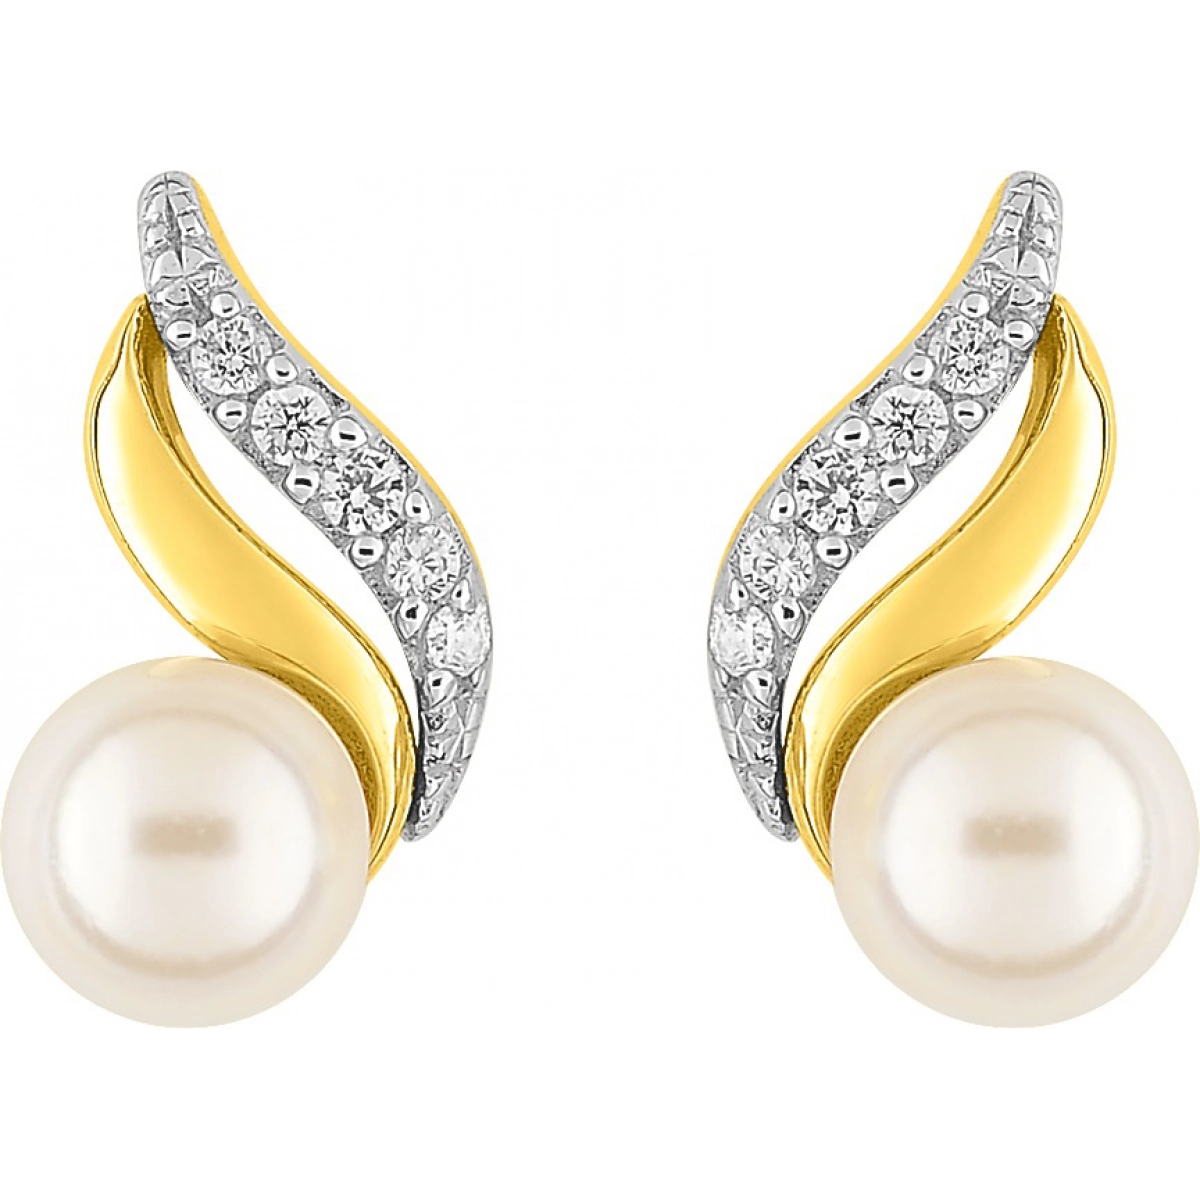 Earrings pair w. synth. pearl, cz and rhod gold plated Brass  Lua Blanca  135634.0